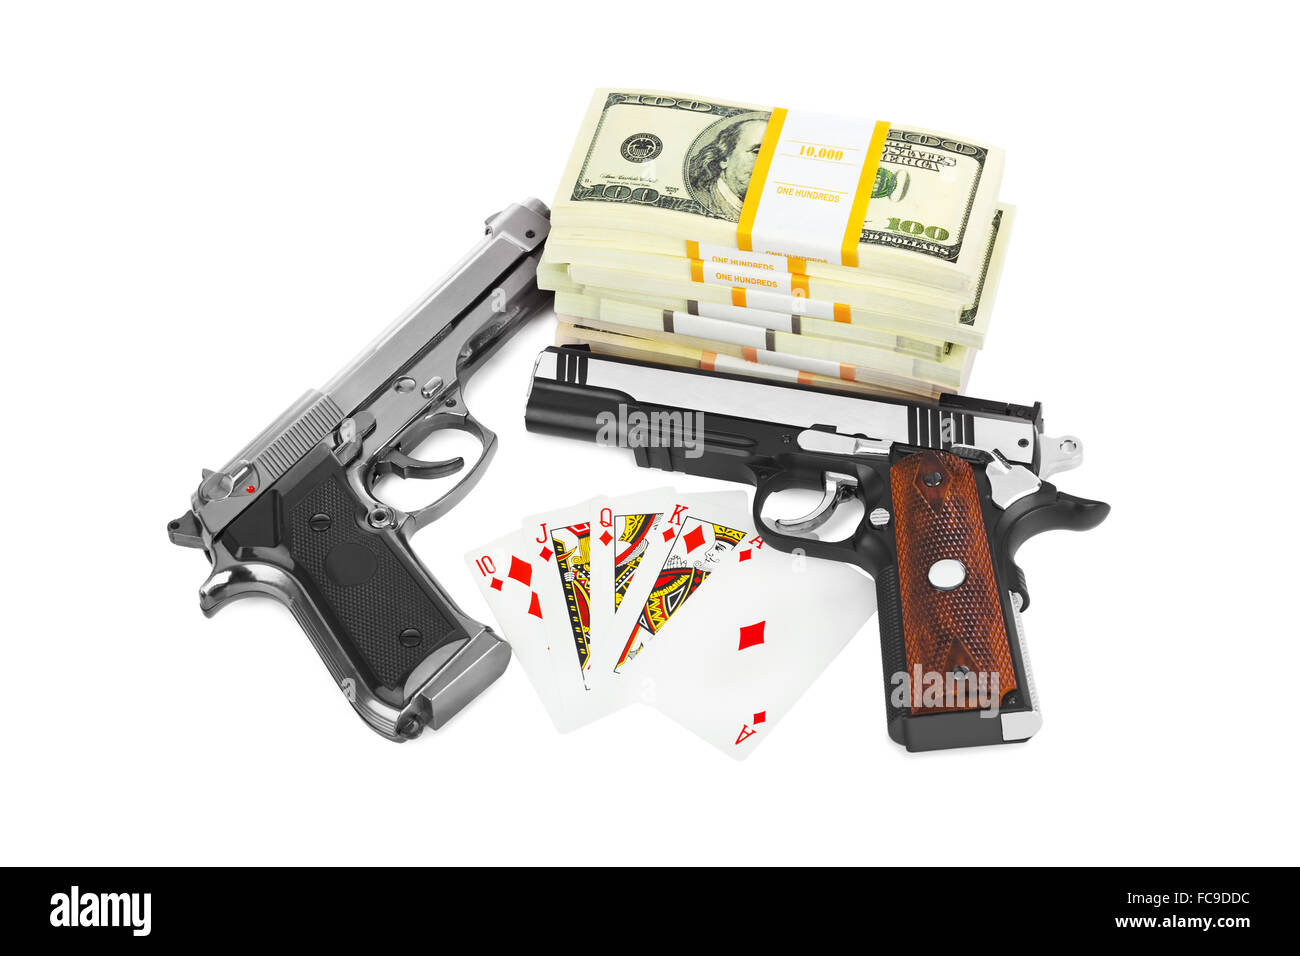 Guns money and playing cards Stock Photo